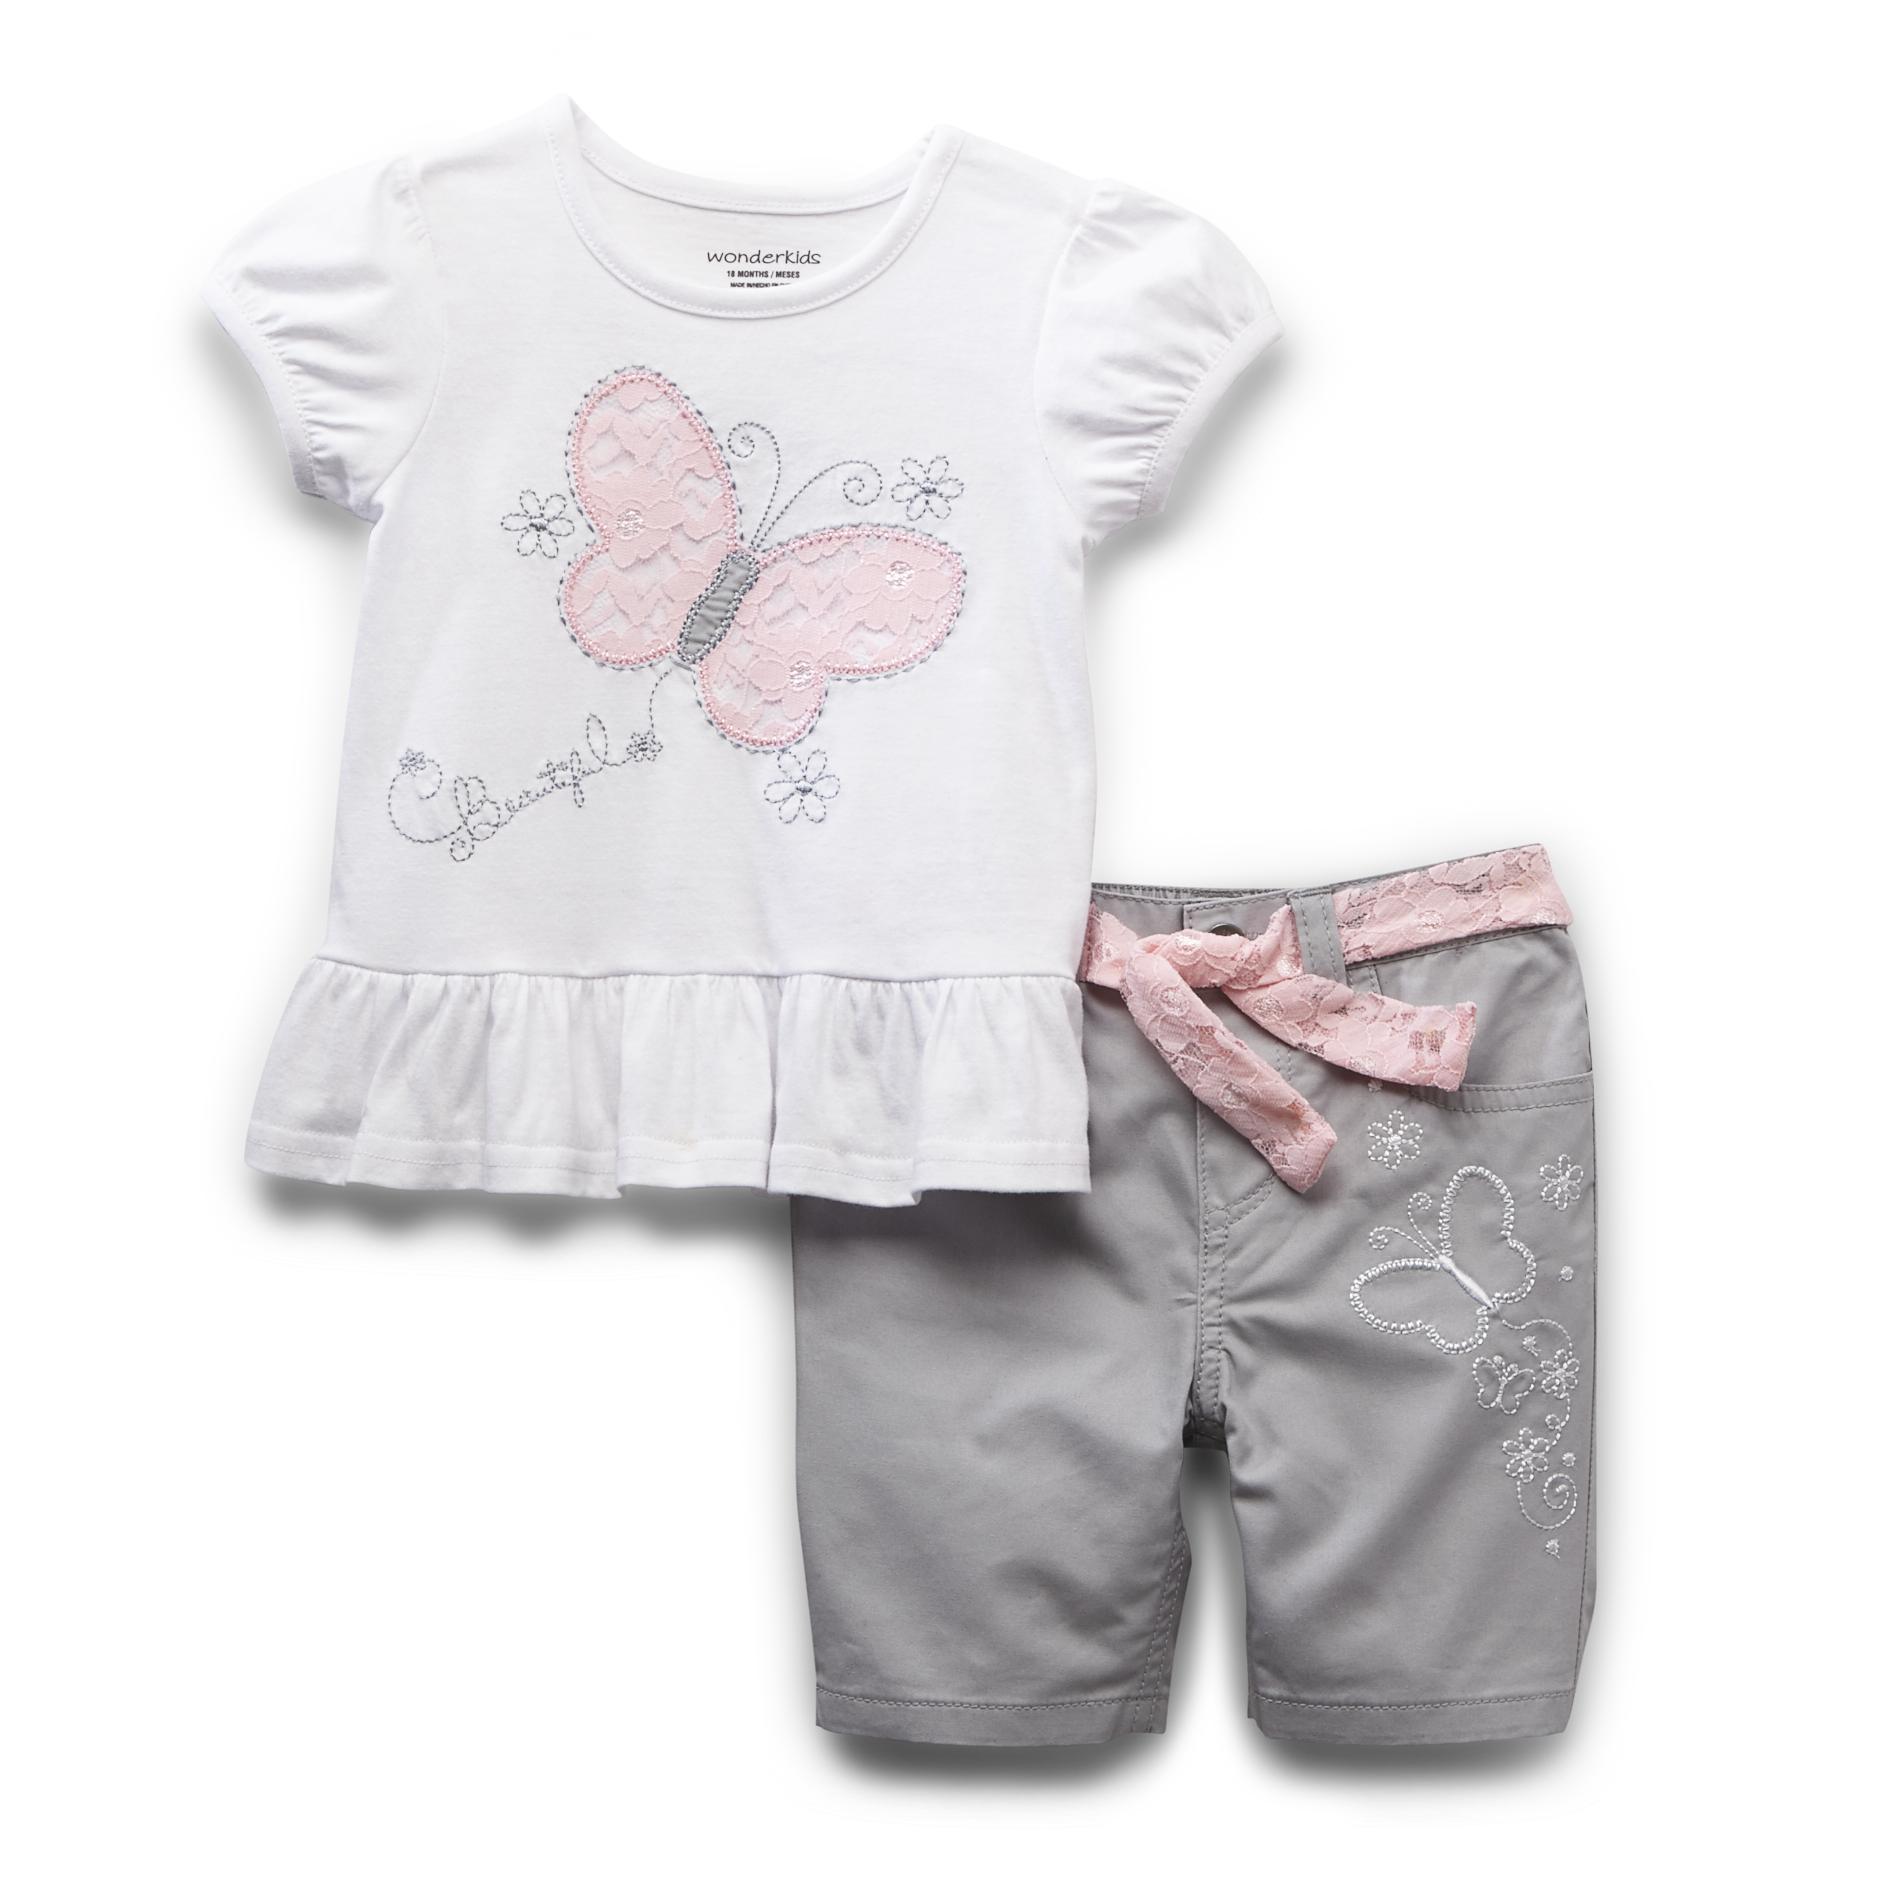 WonderKids Infant & Toddler Girl's Top & Twill Shorts - Butterfly